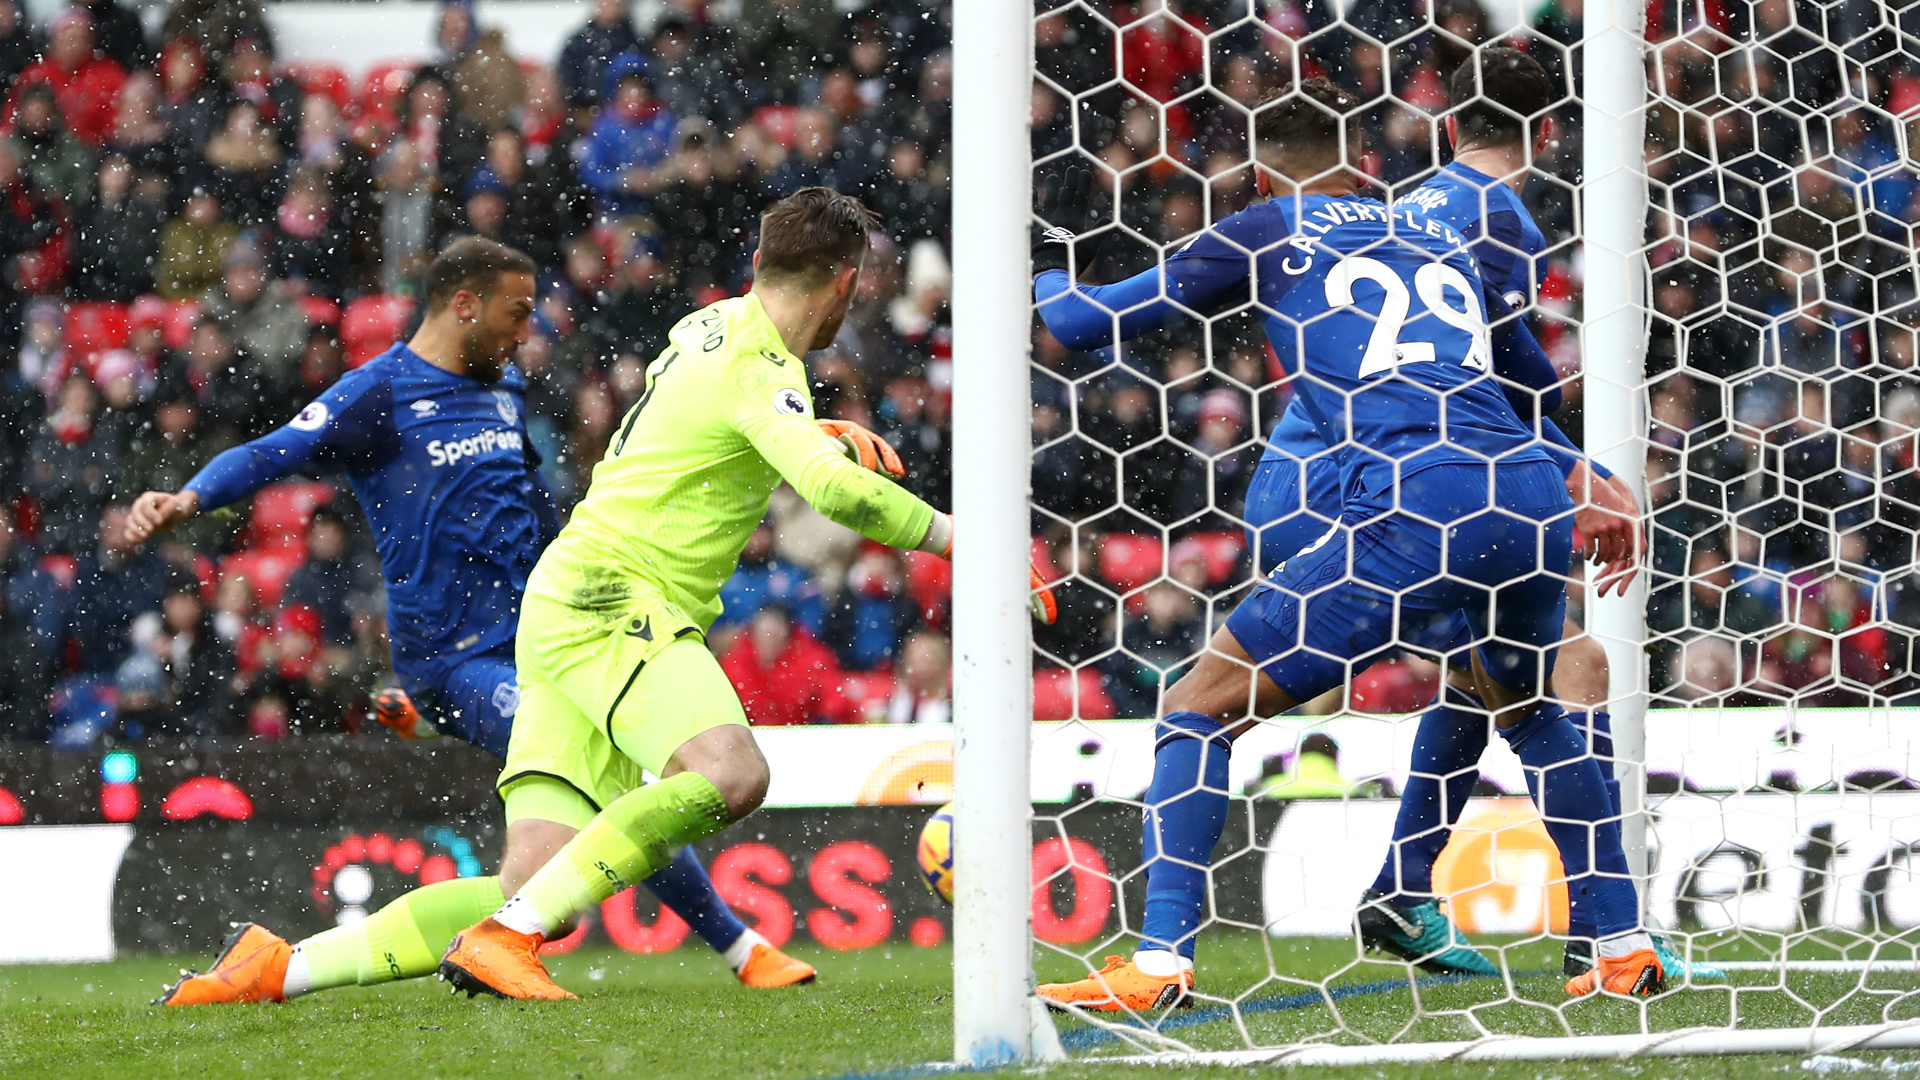 Stoke City 1 Everton 2: Tosun at the double after Adam's early dismissal